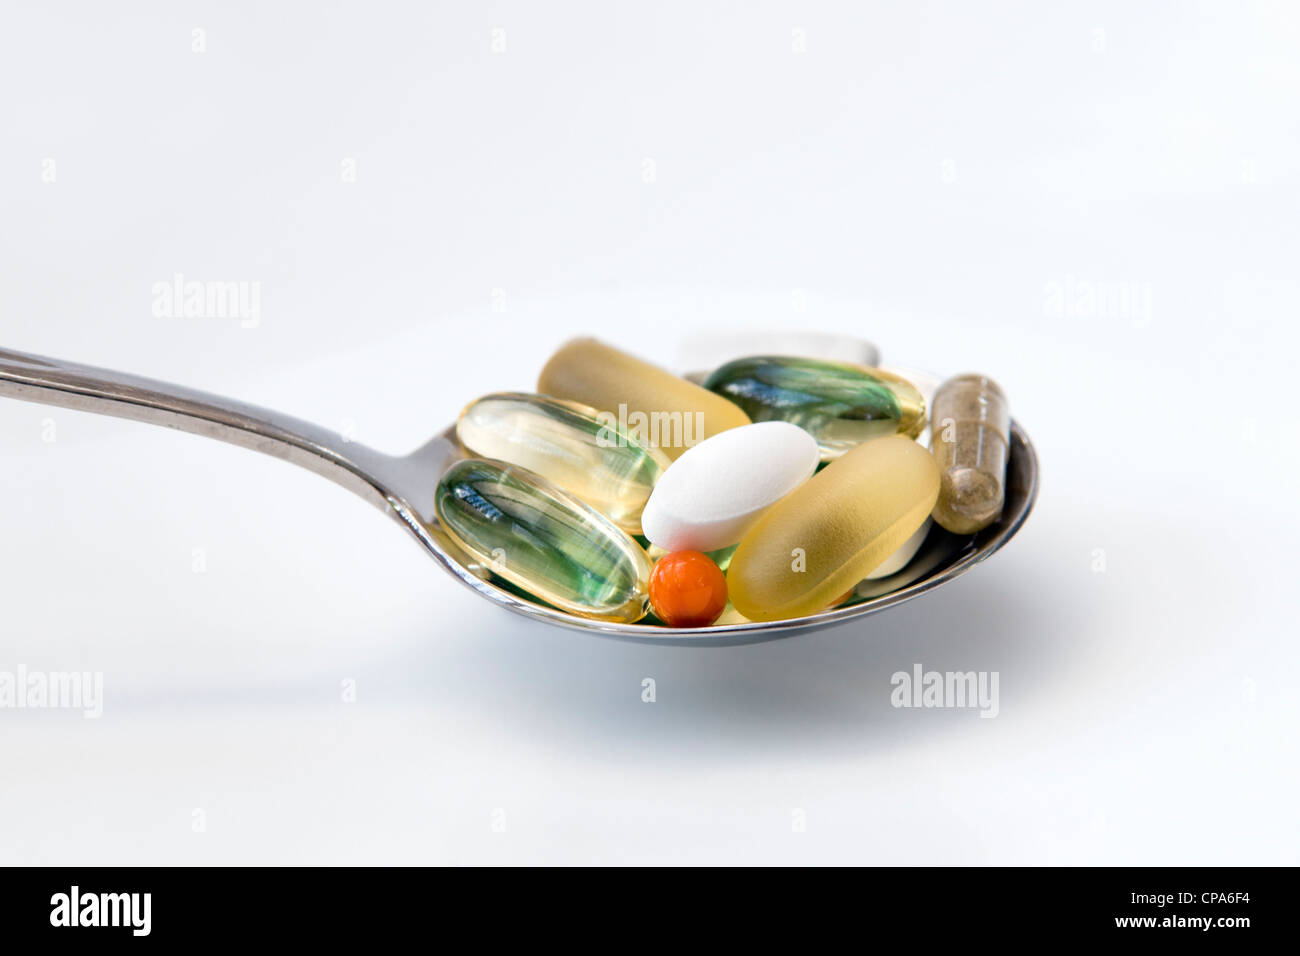 Selection of vitamins (omega 3, Co-enzyme Q10, peppermint, chondroitin, ginkgo and ginseng) on spoon on white background. Stock Photo